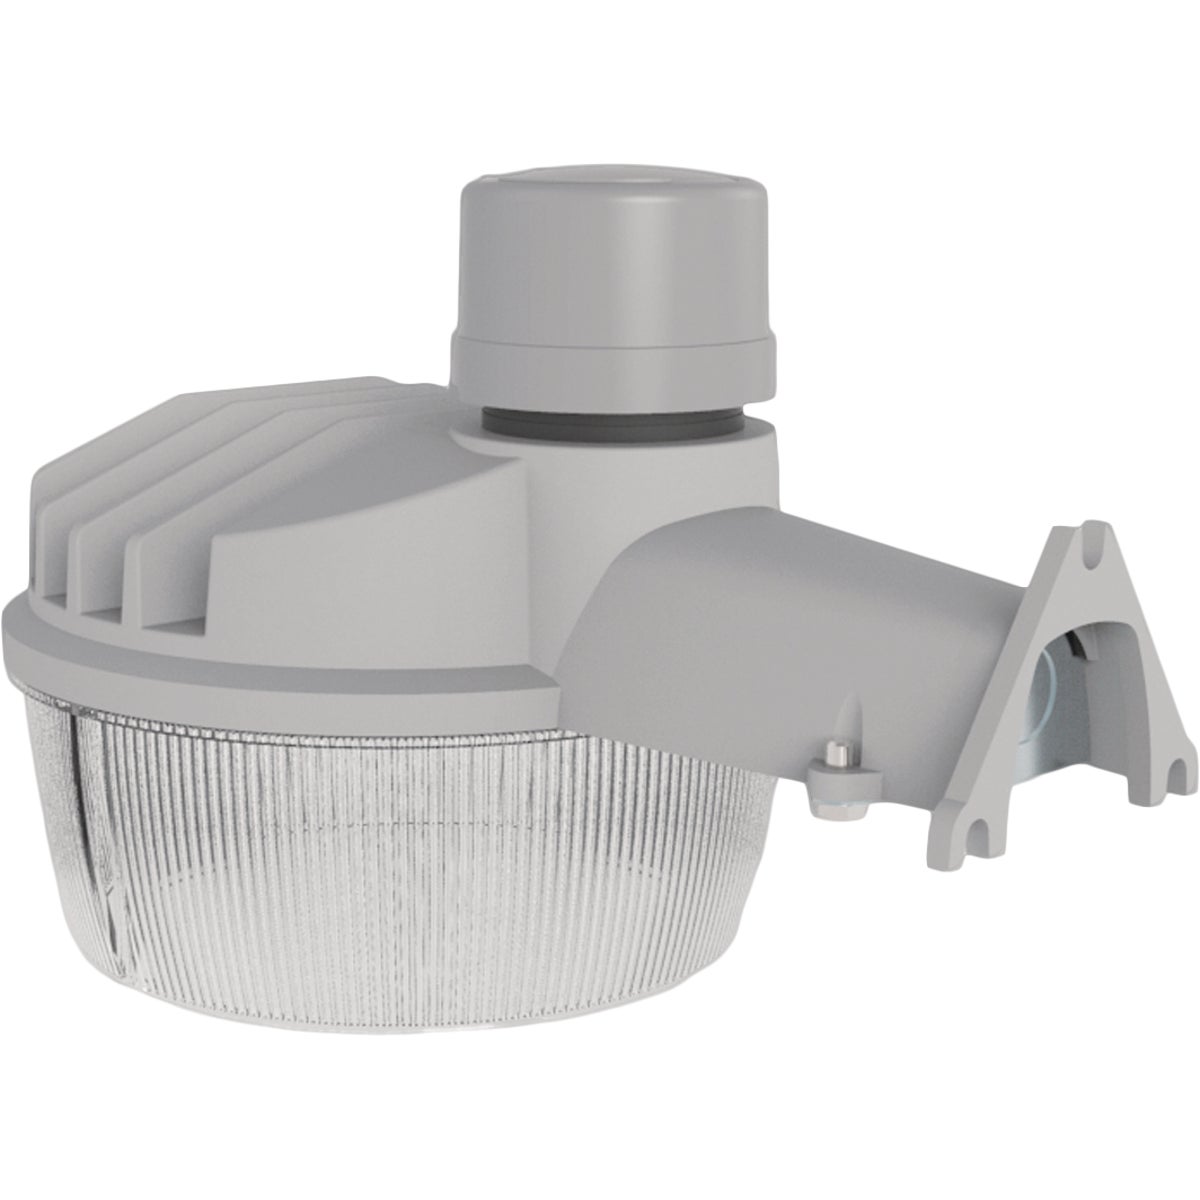 Halo Gray Dusk To Dawn LED Outdoor Area Light Fixture, 10,000 Lm.